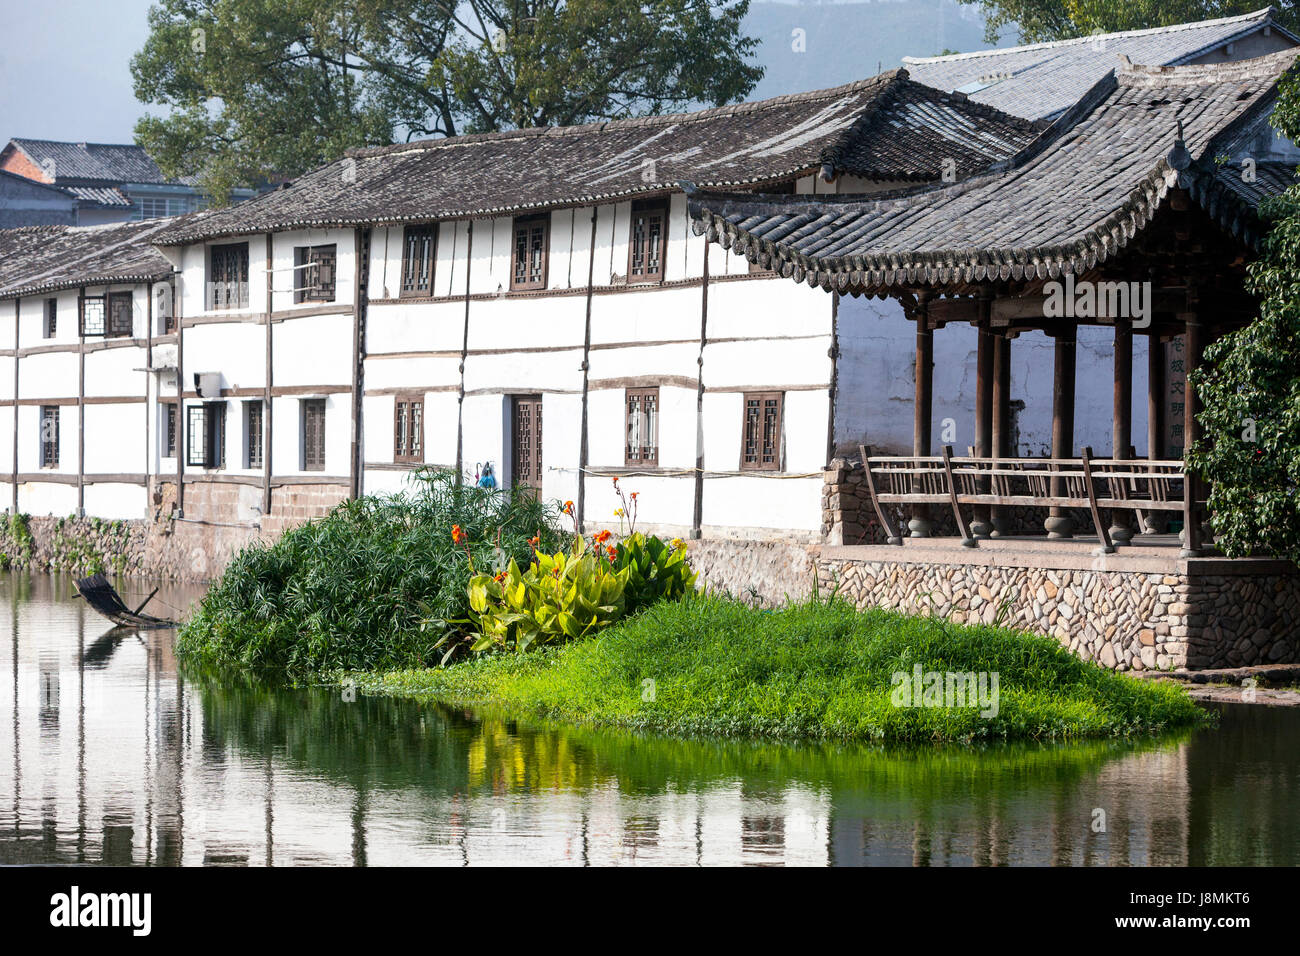 Cangpo, Zhejiang, China.  Village Houses, Meeting Place on Right. Stock Photo